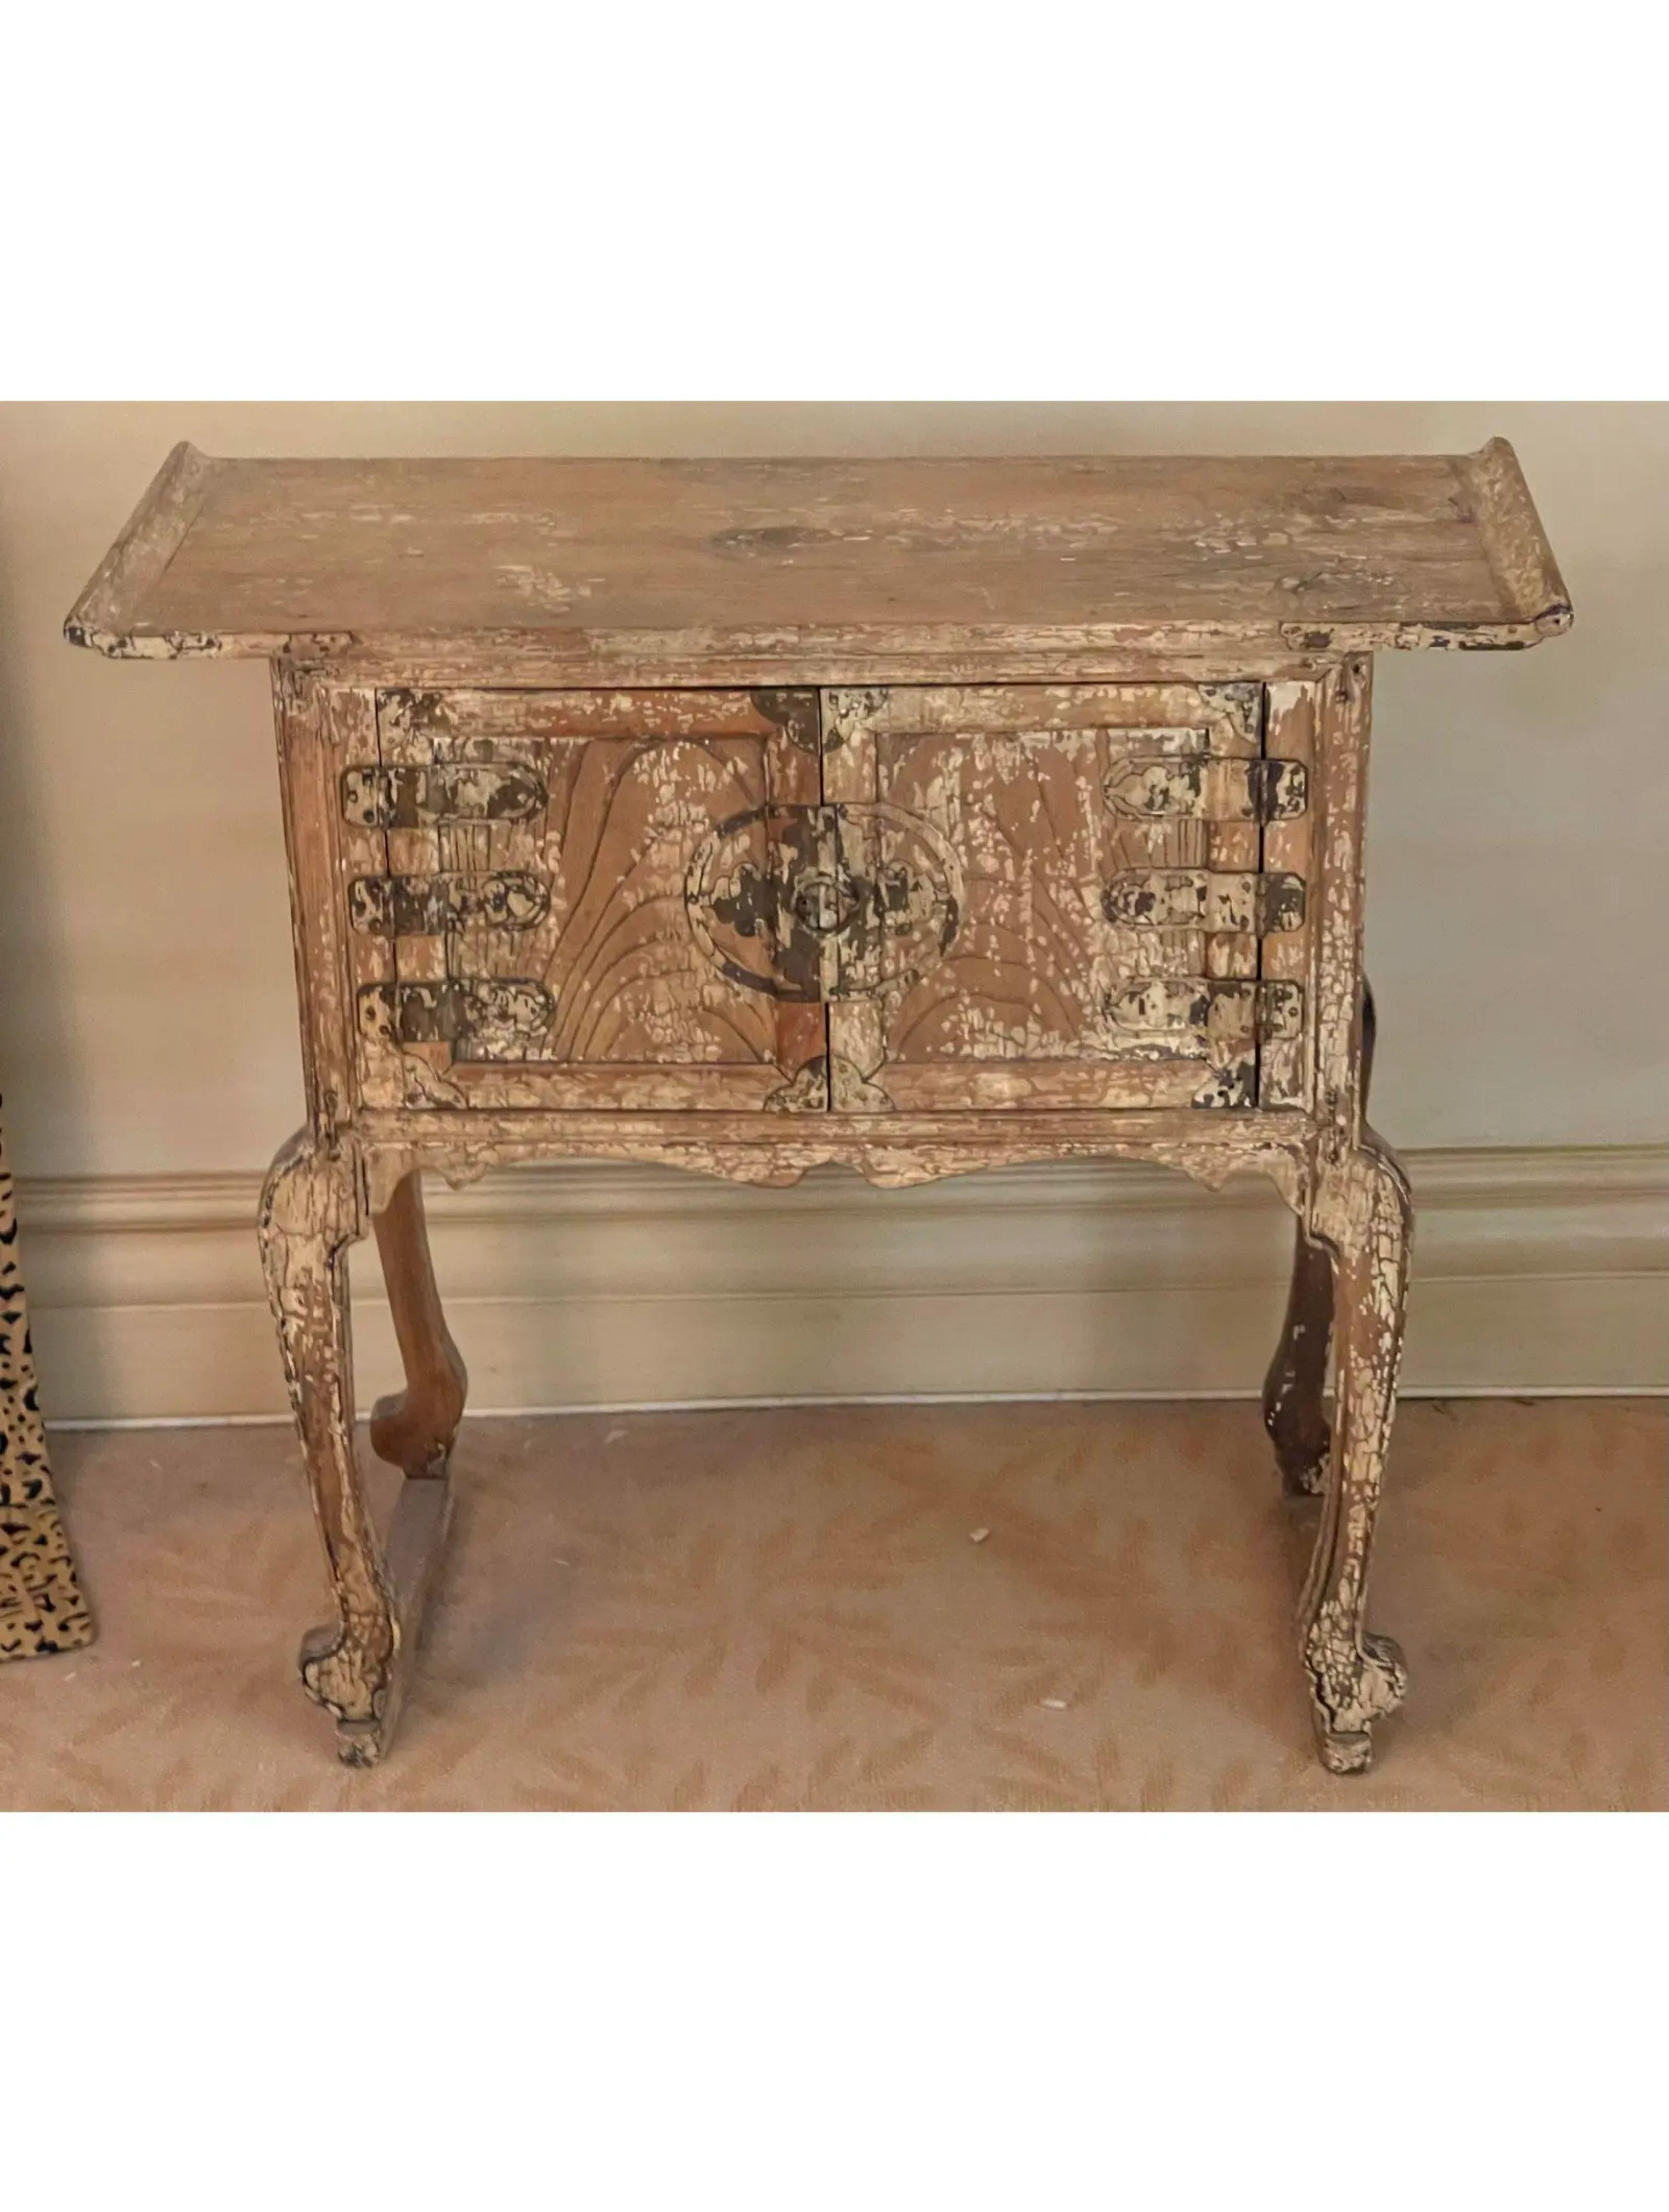 Antique Chinese Ming Style side table with crackle finish. It is beautifully worn with a crackle finish and features two doors and a Ming style form.

Additional information: 
Materials: Wood
Color: Beige
Period: Early 20th Century
Styles: